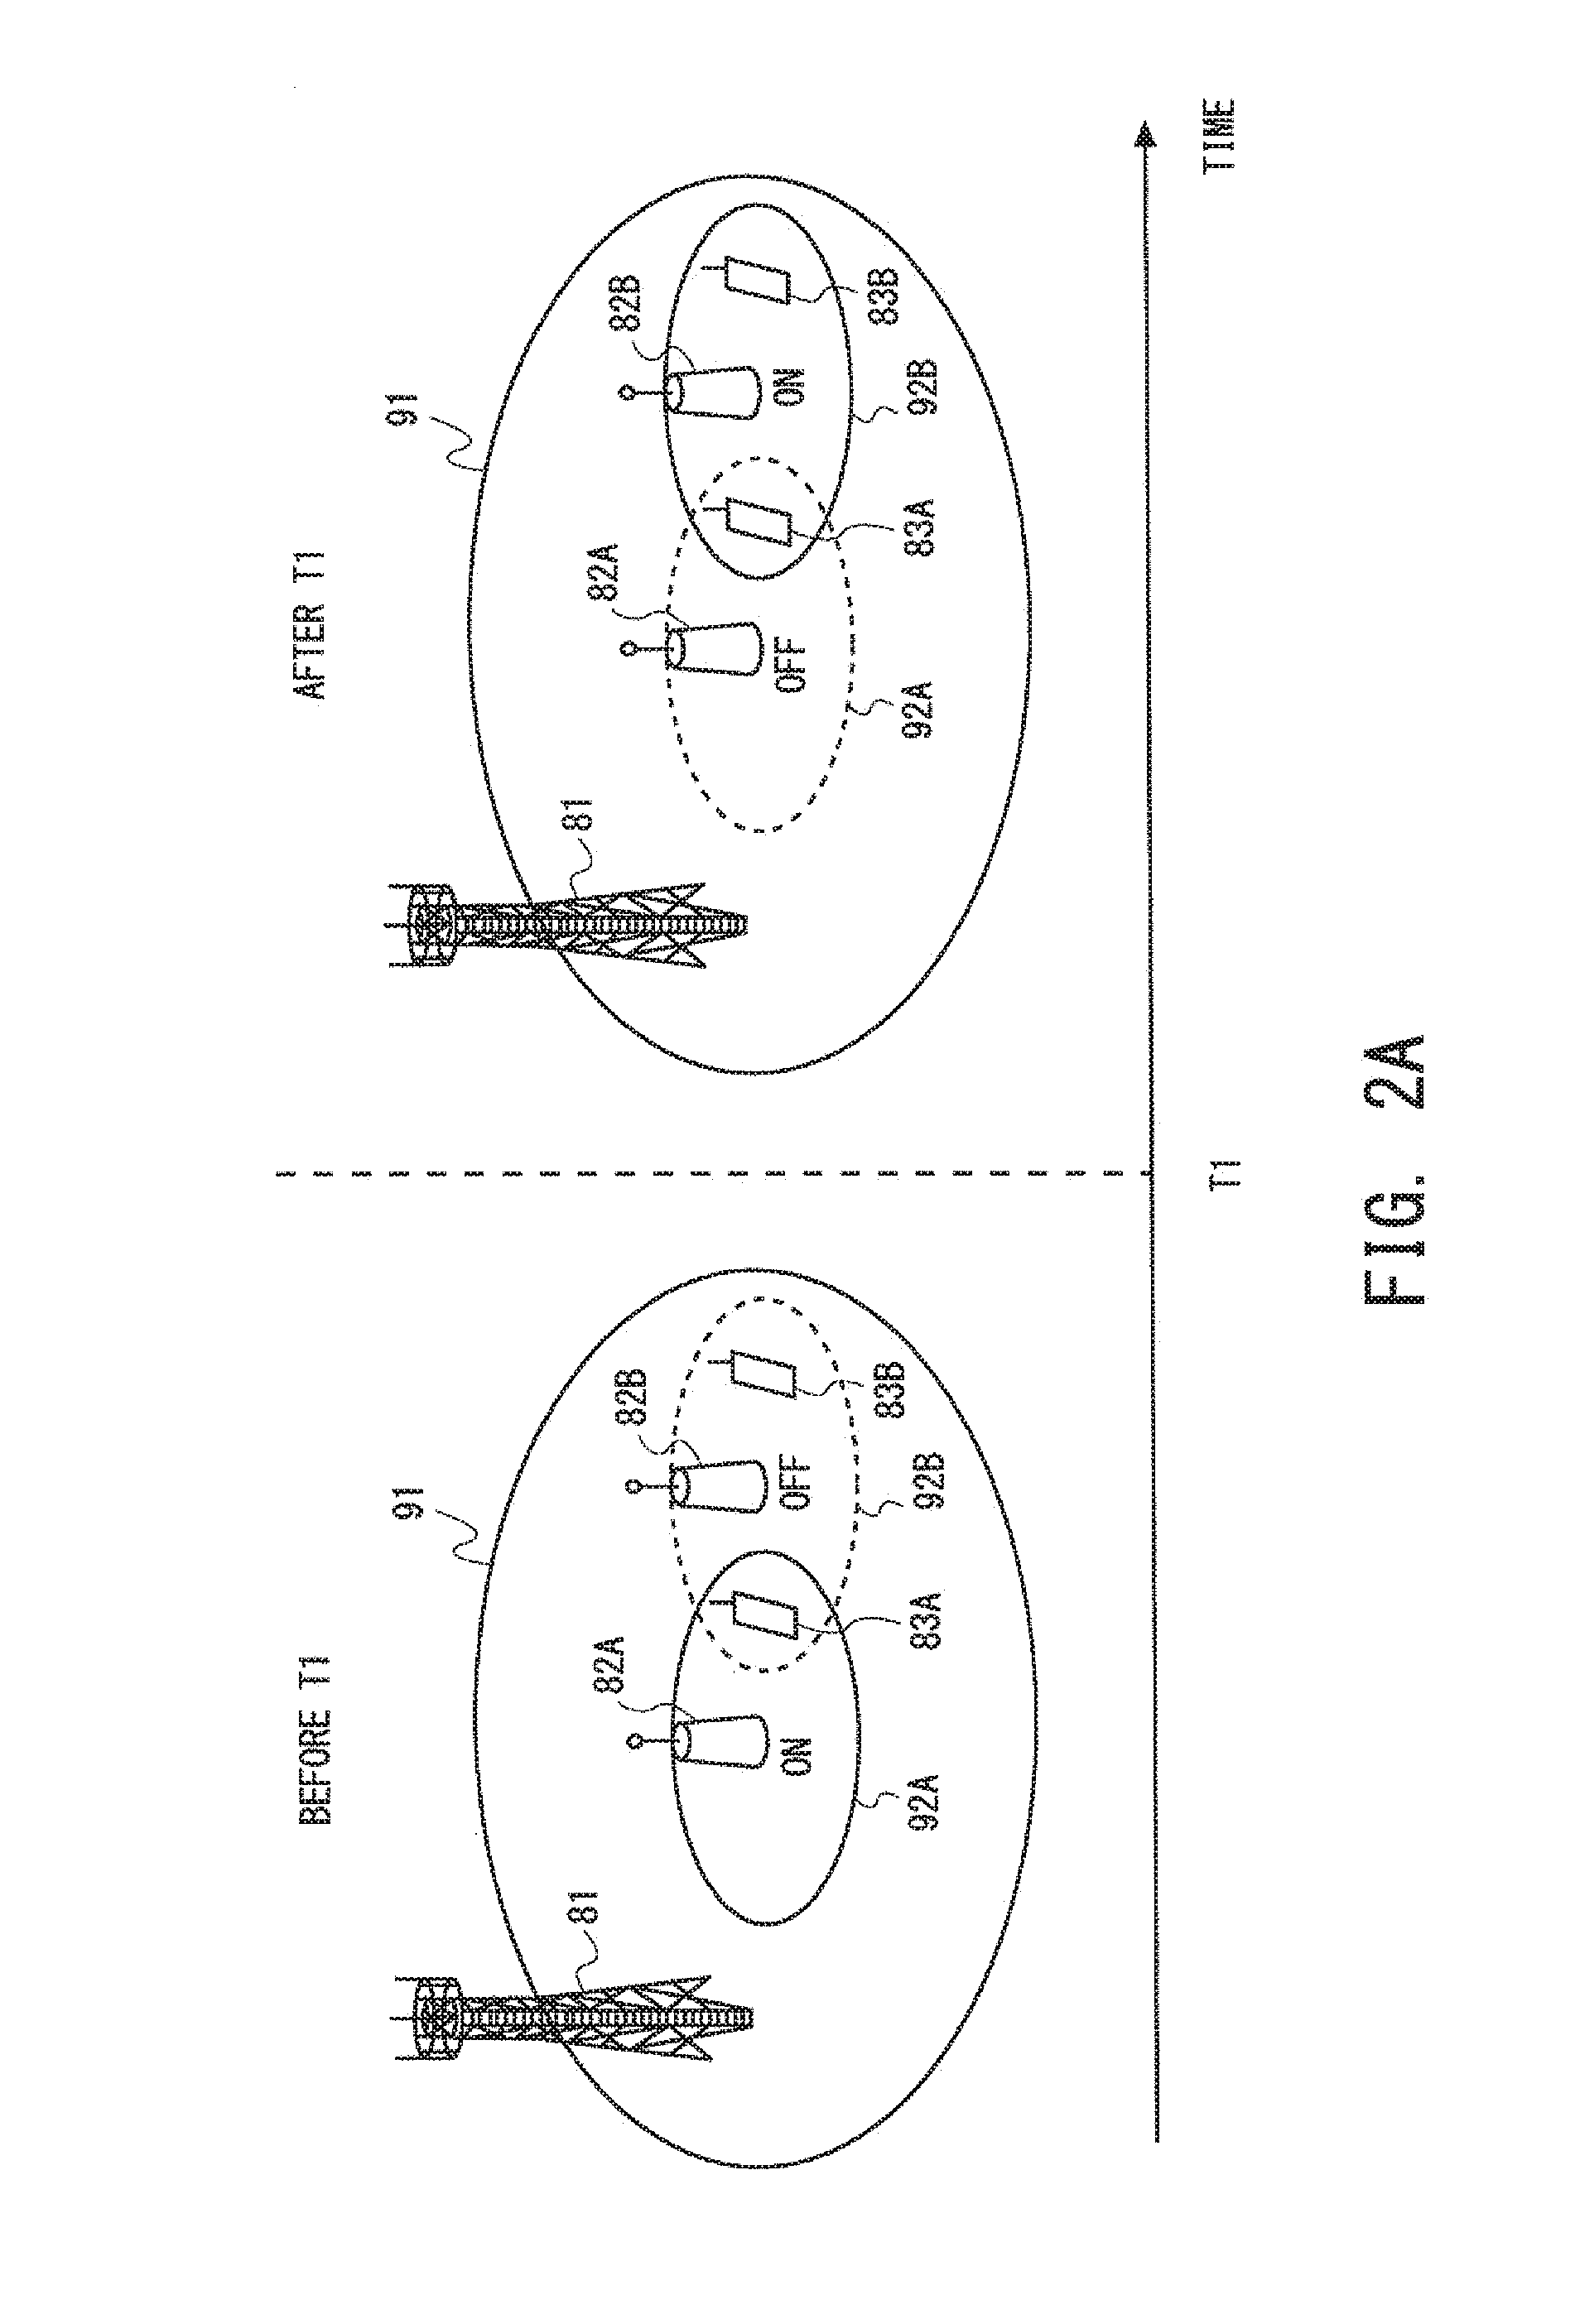 Discovery period configuration for small cell on/off